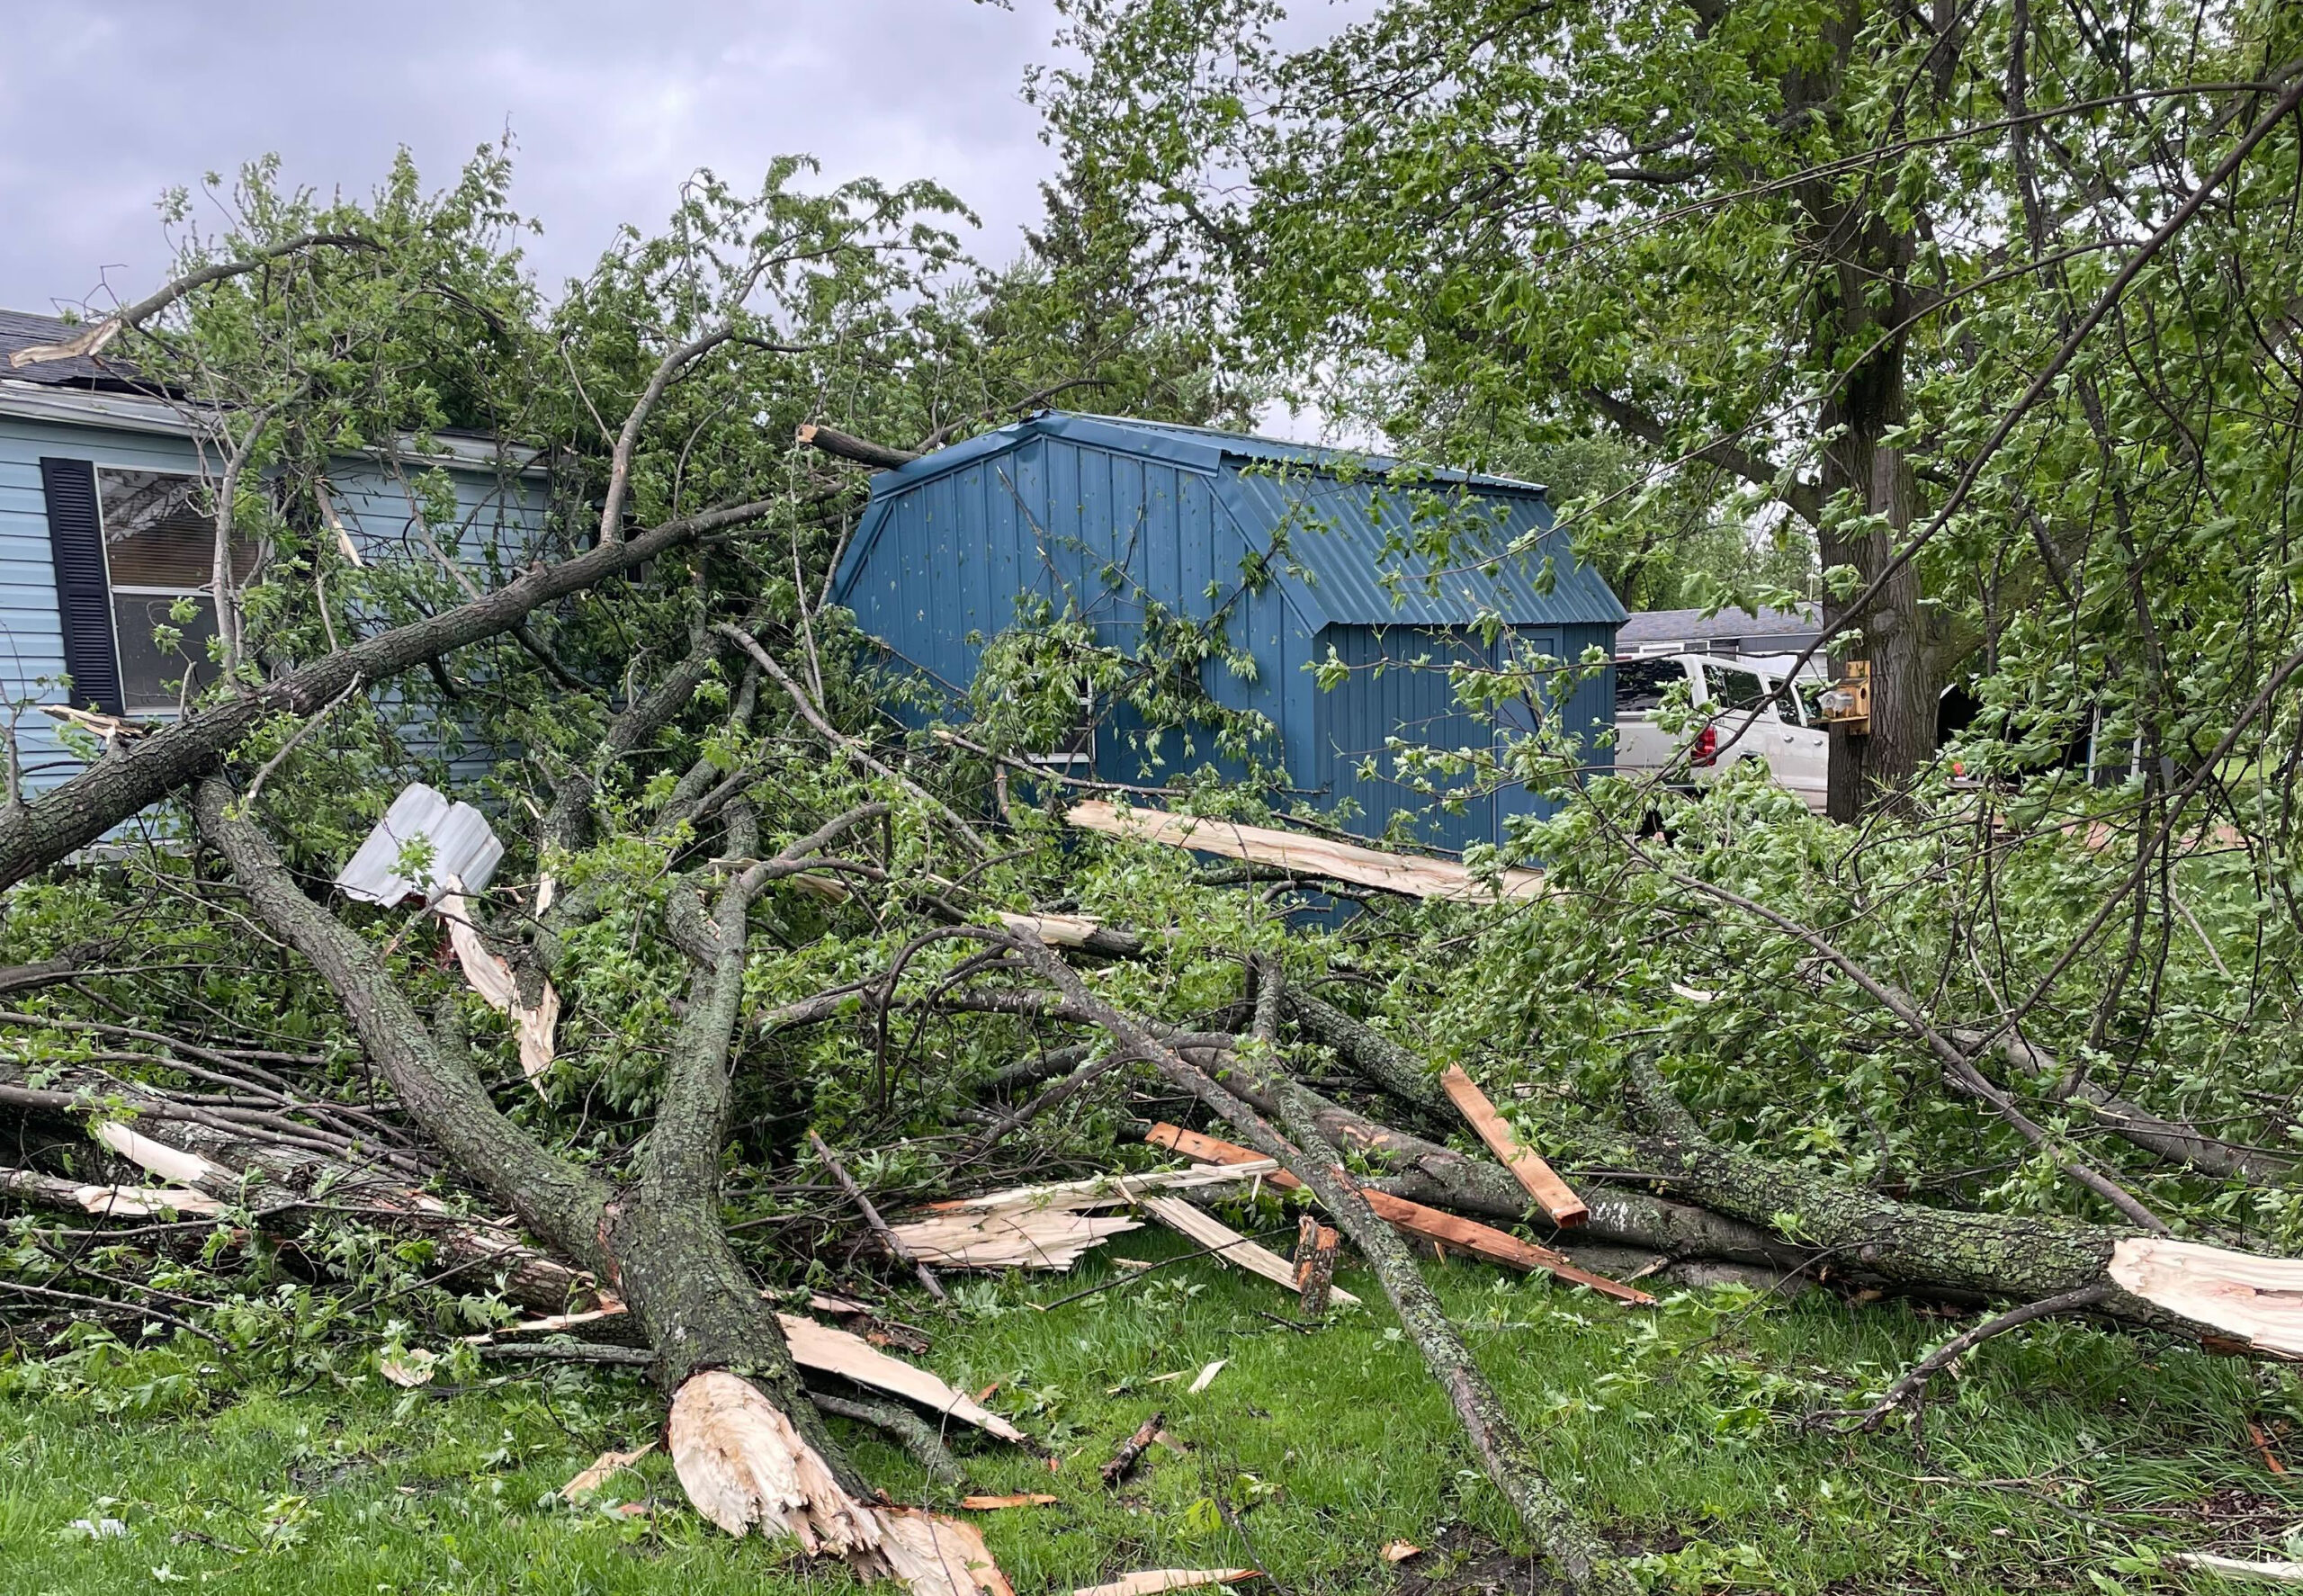 5 Wisconsin tornadoes confirmed following Tuesday severe storms